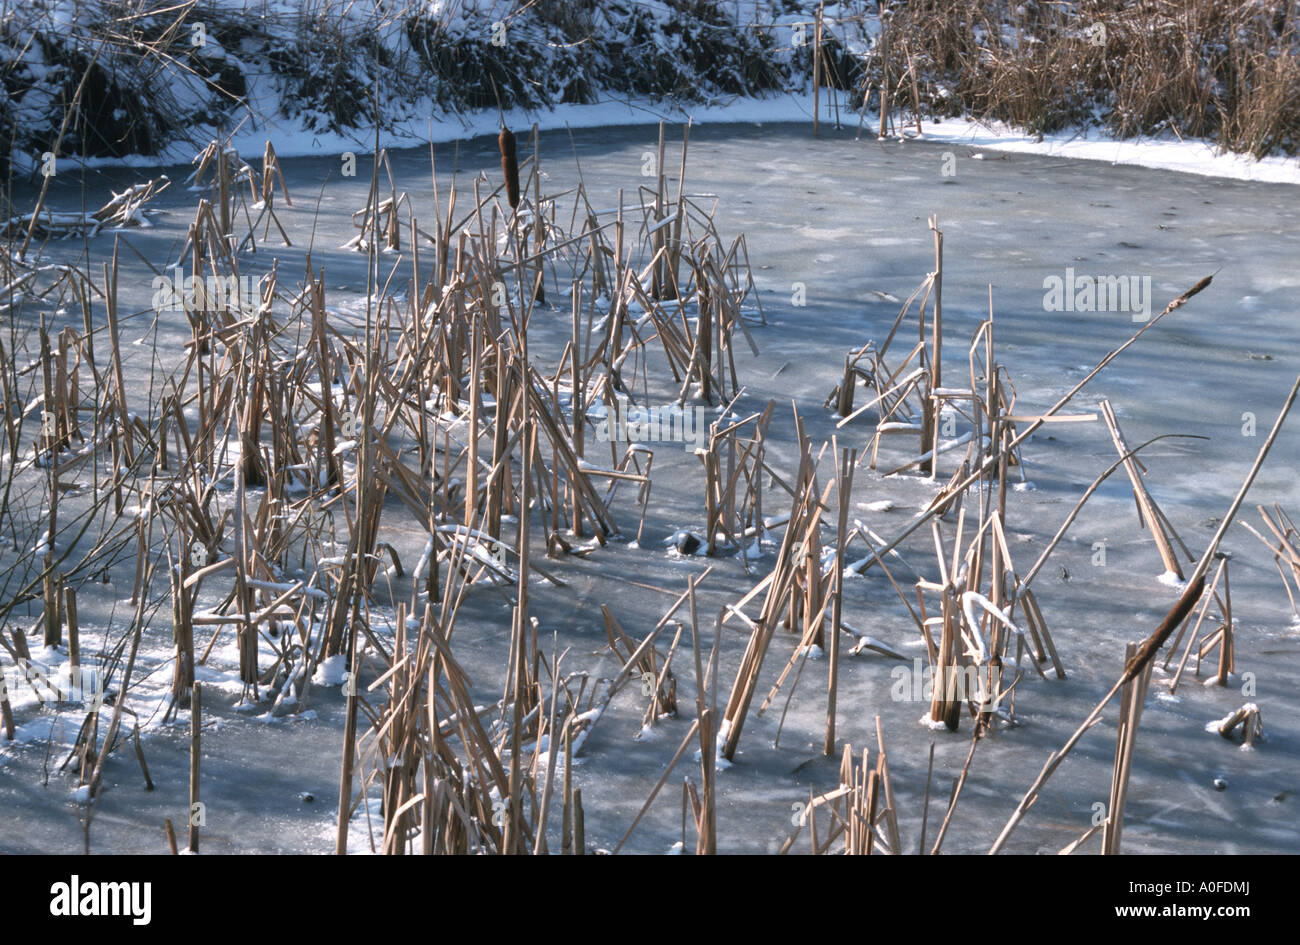 common cattail, broad-leaved cattail, great reedmace, bulrush (Typha latifolia), frozen pond, water aeration with reeds Stock Photo